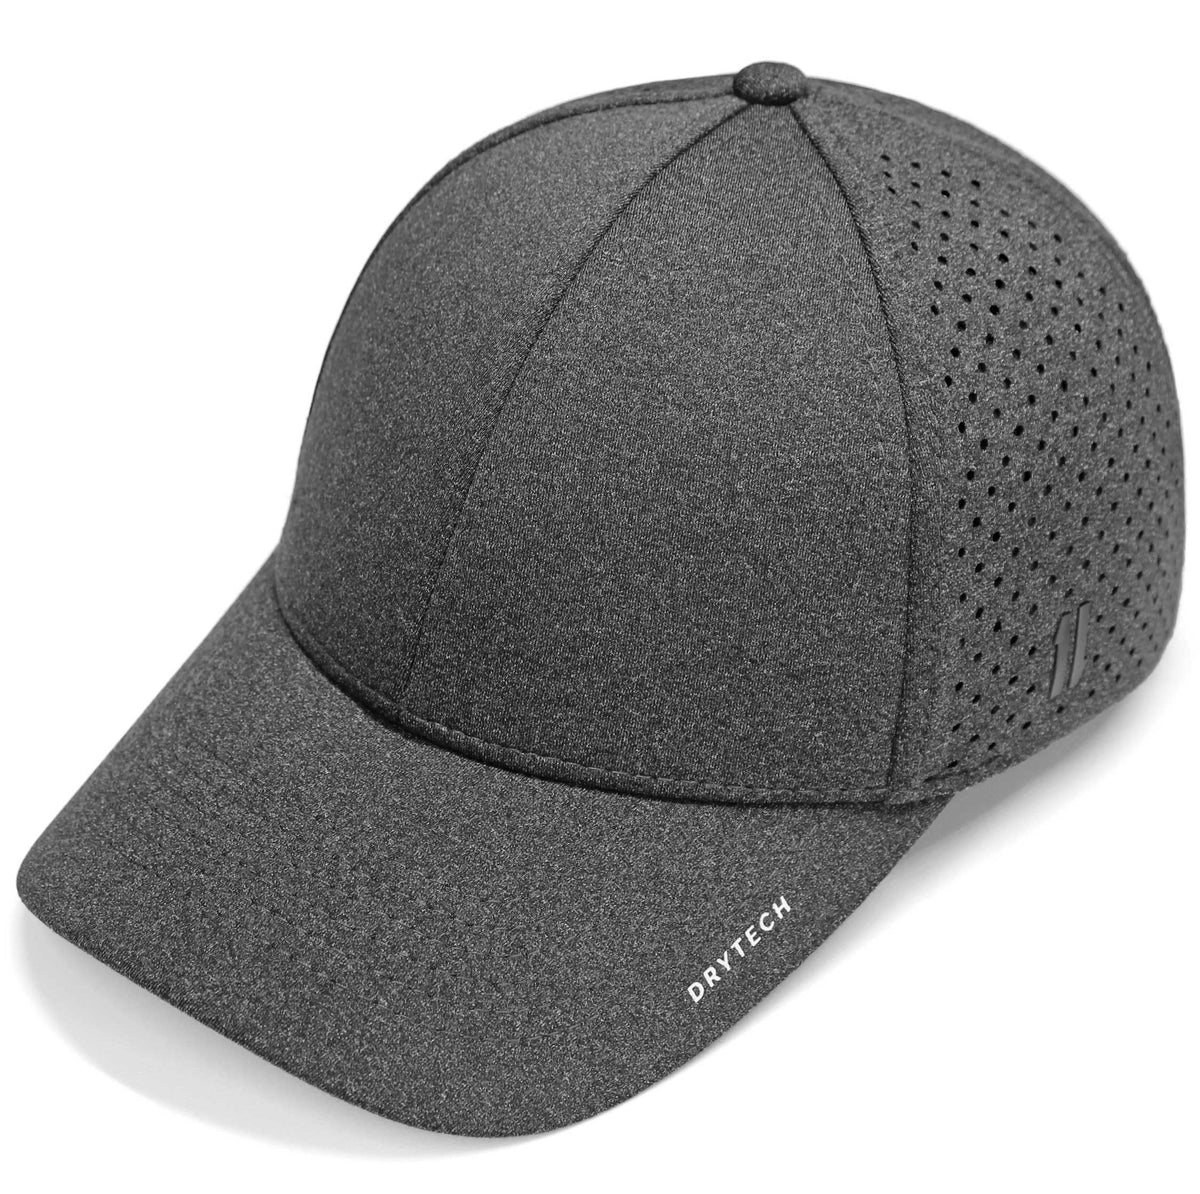 Womens Workout Hat - The Rise & Grind - Shop Athletic Hat, Gym Hat Charcoal / S/M